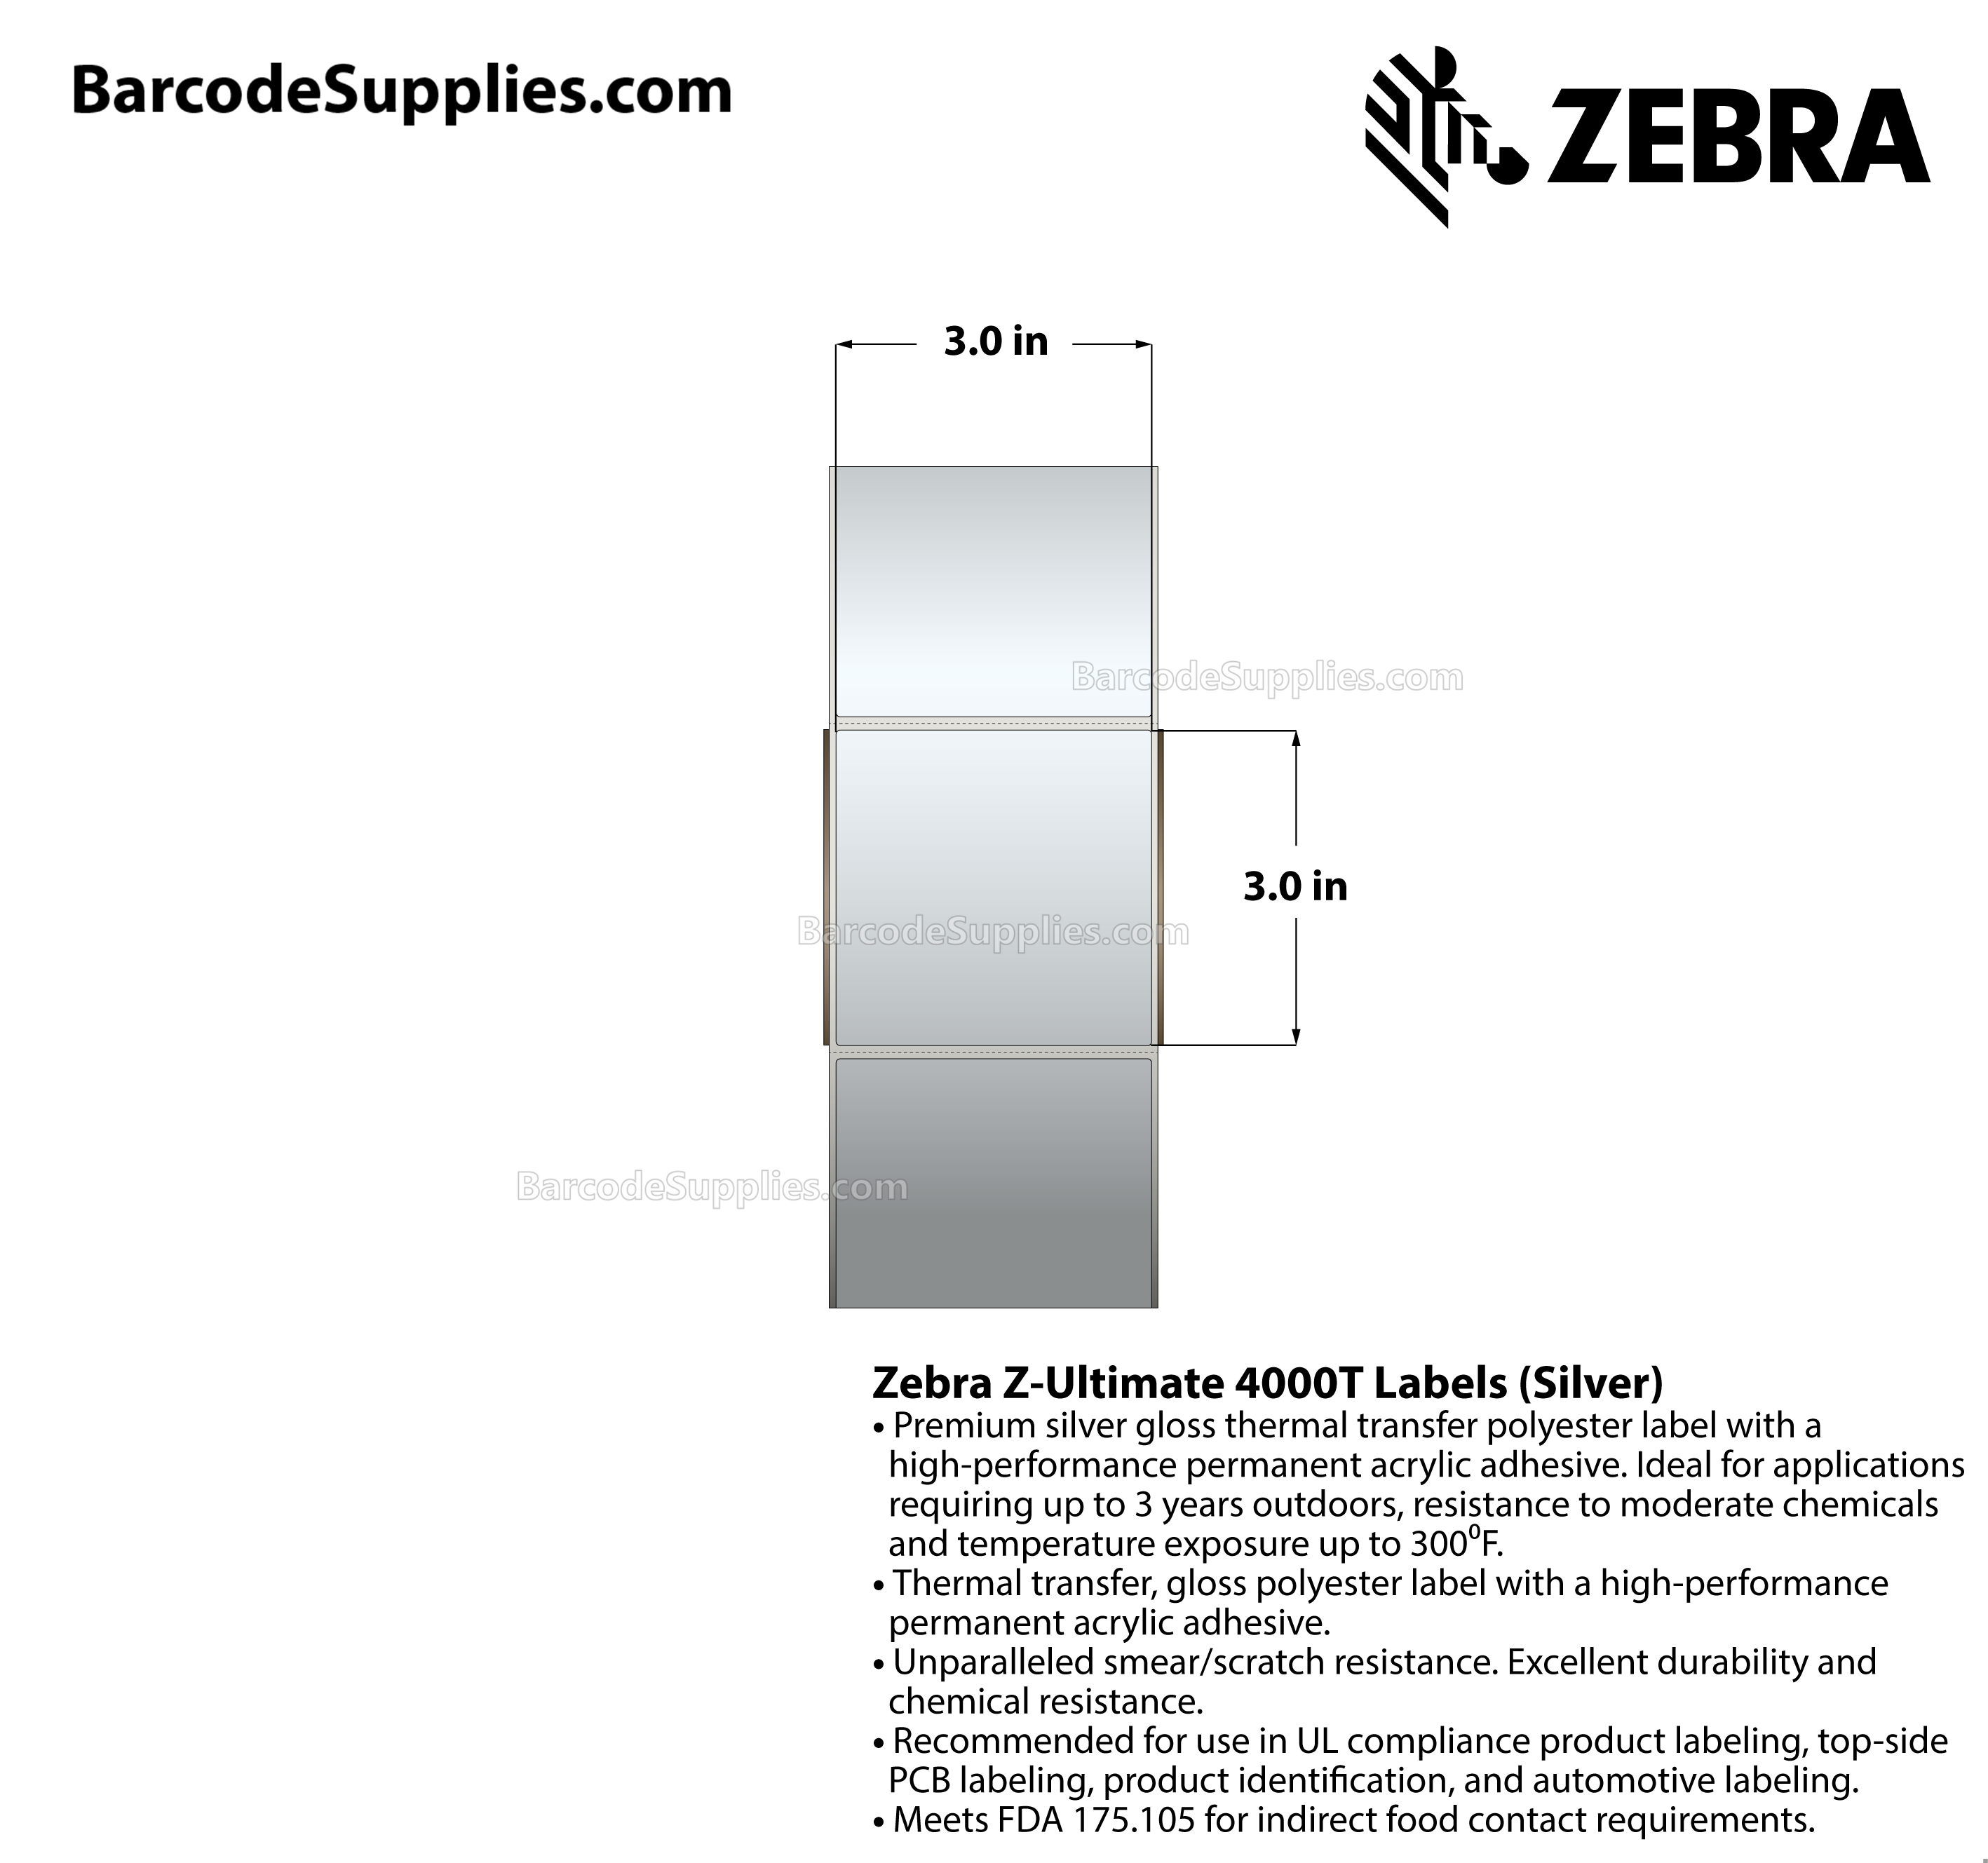 3 x 3 Thermal Transfer Silver Z-Ultimate 4000T Silver Labels With Permanent Adhesive - Perforated - 1000 Labels Per Roll - Carton Of 1 Rolls - 1000 Labels Total - MPN: 10023159